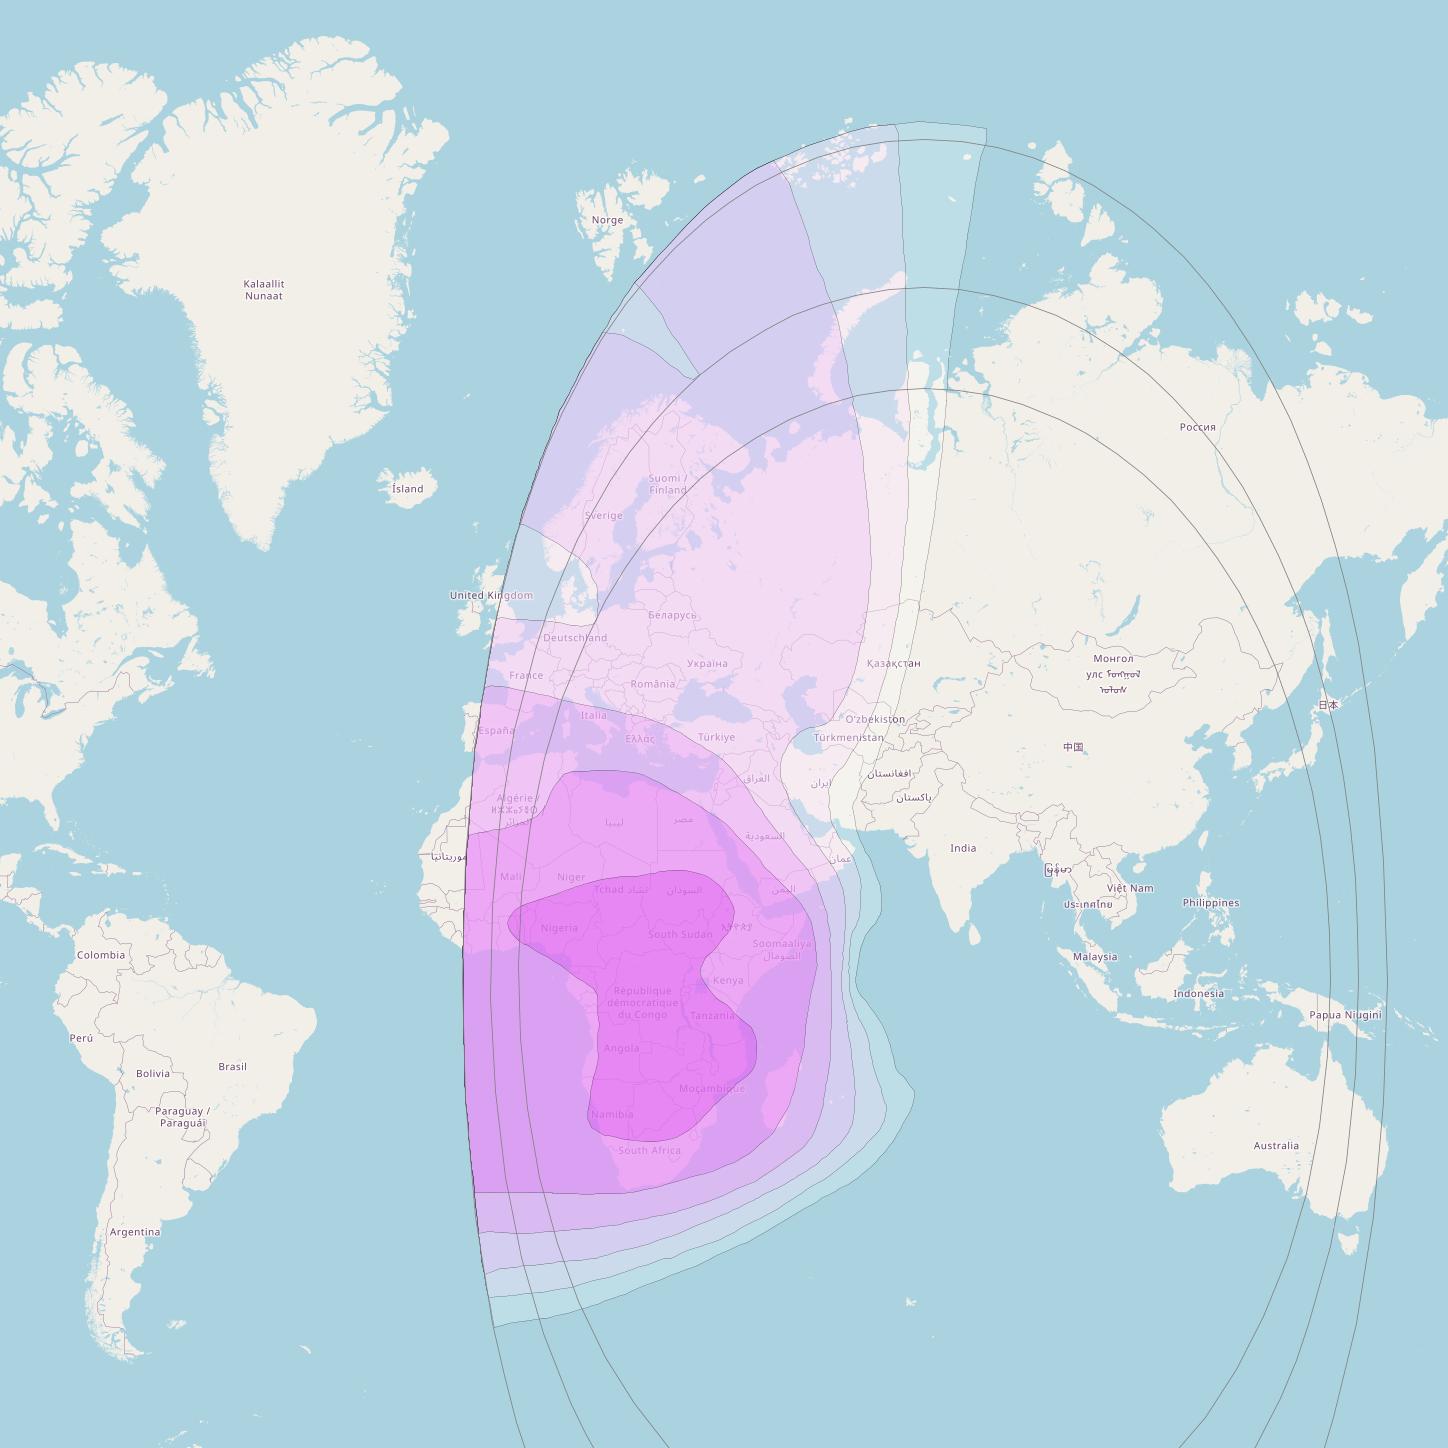 Intelsat 22 at 72° E downlink C-band West Hemi beam coverage map